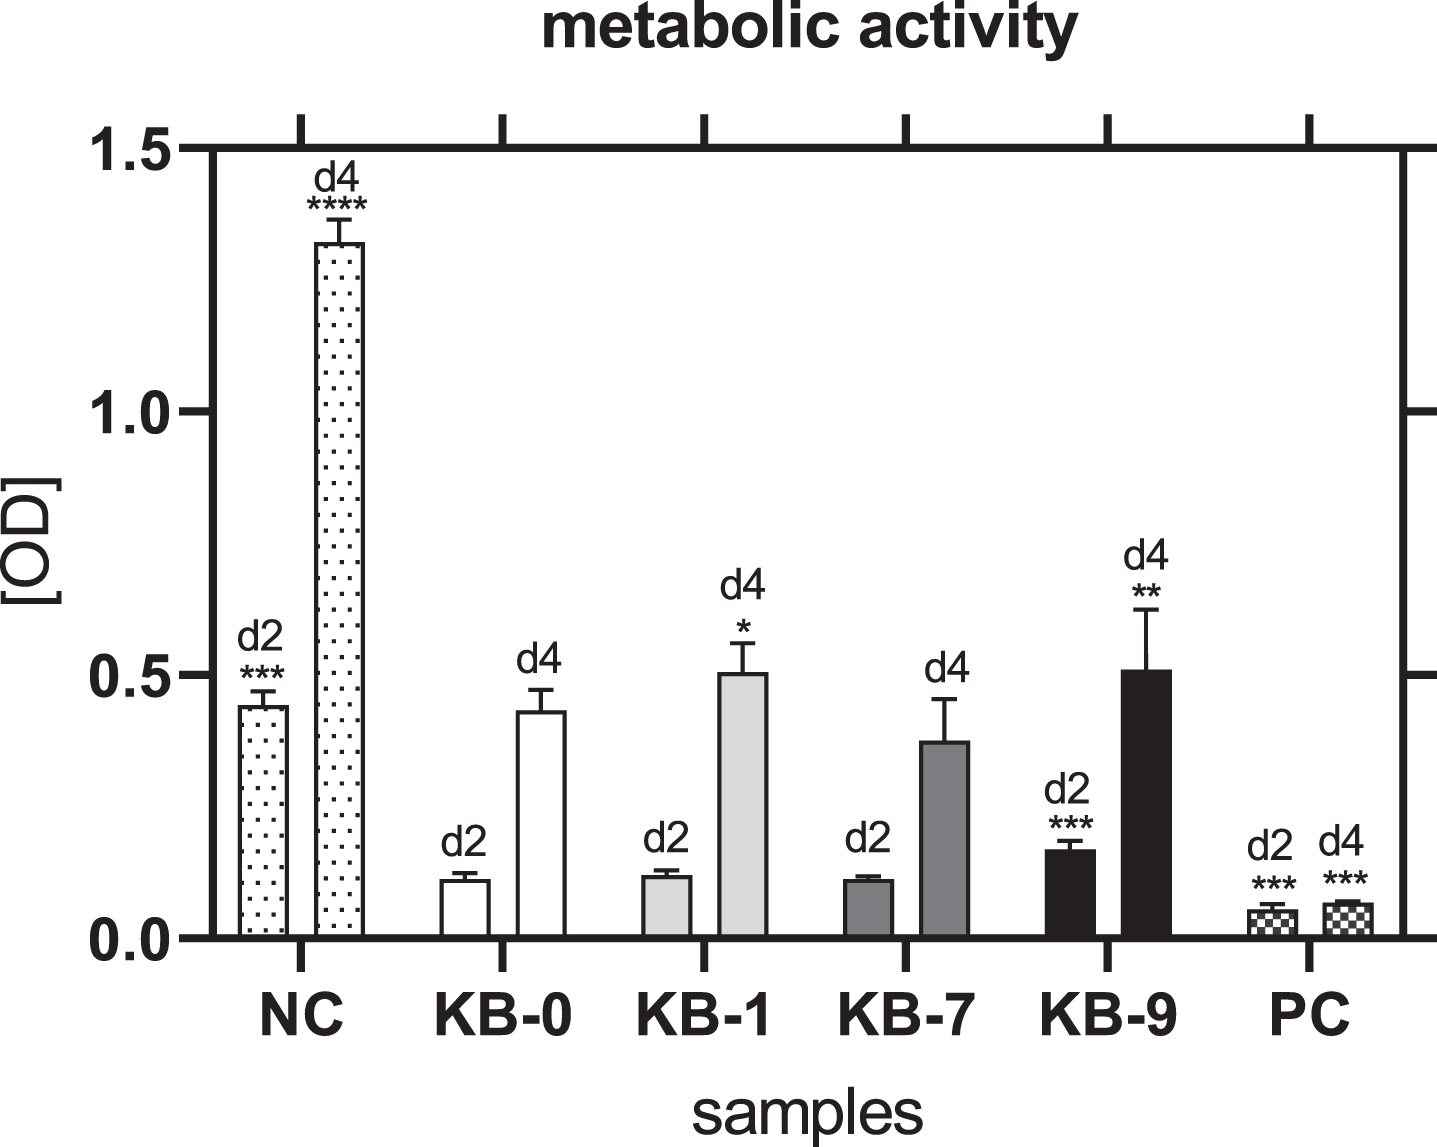 Metabolic activity of CHO cells two and four days after cell seeding on TCP (NC), KB-0, KB-1, KB-7 and KB-9. Shown are arithmetic mean±standard deviation of n = 6. Statistical significance was analyzed using t-test analysis compared to KB-0. *: p < 0.05, **: p < 0.01, ***: p < 0.001.